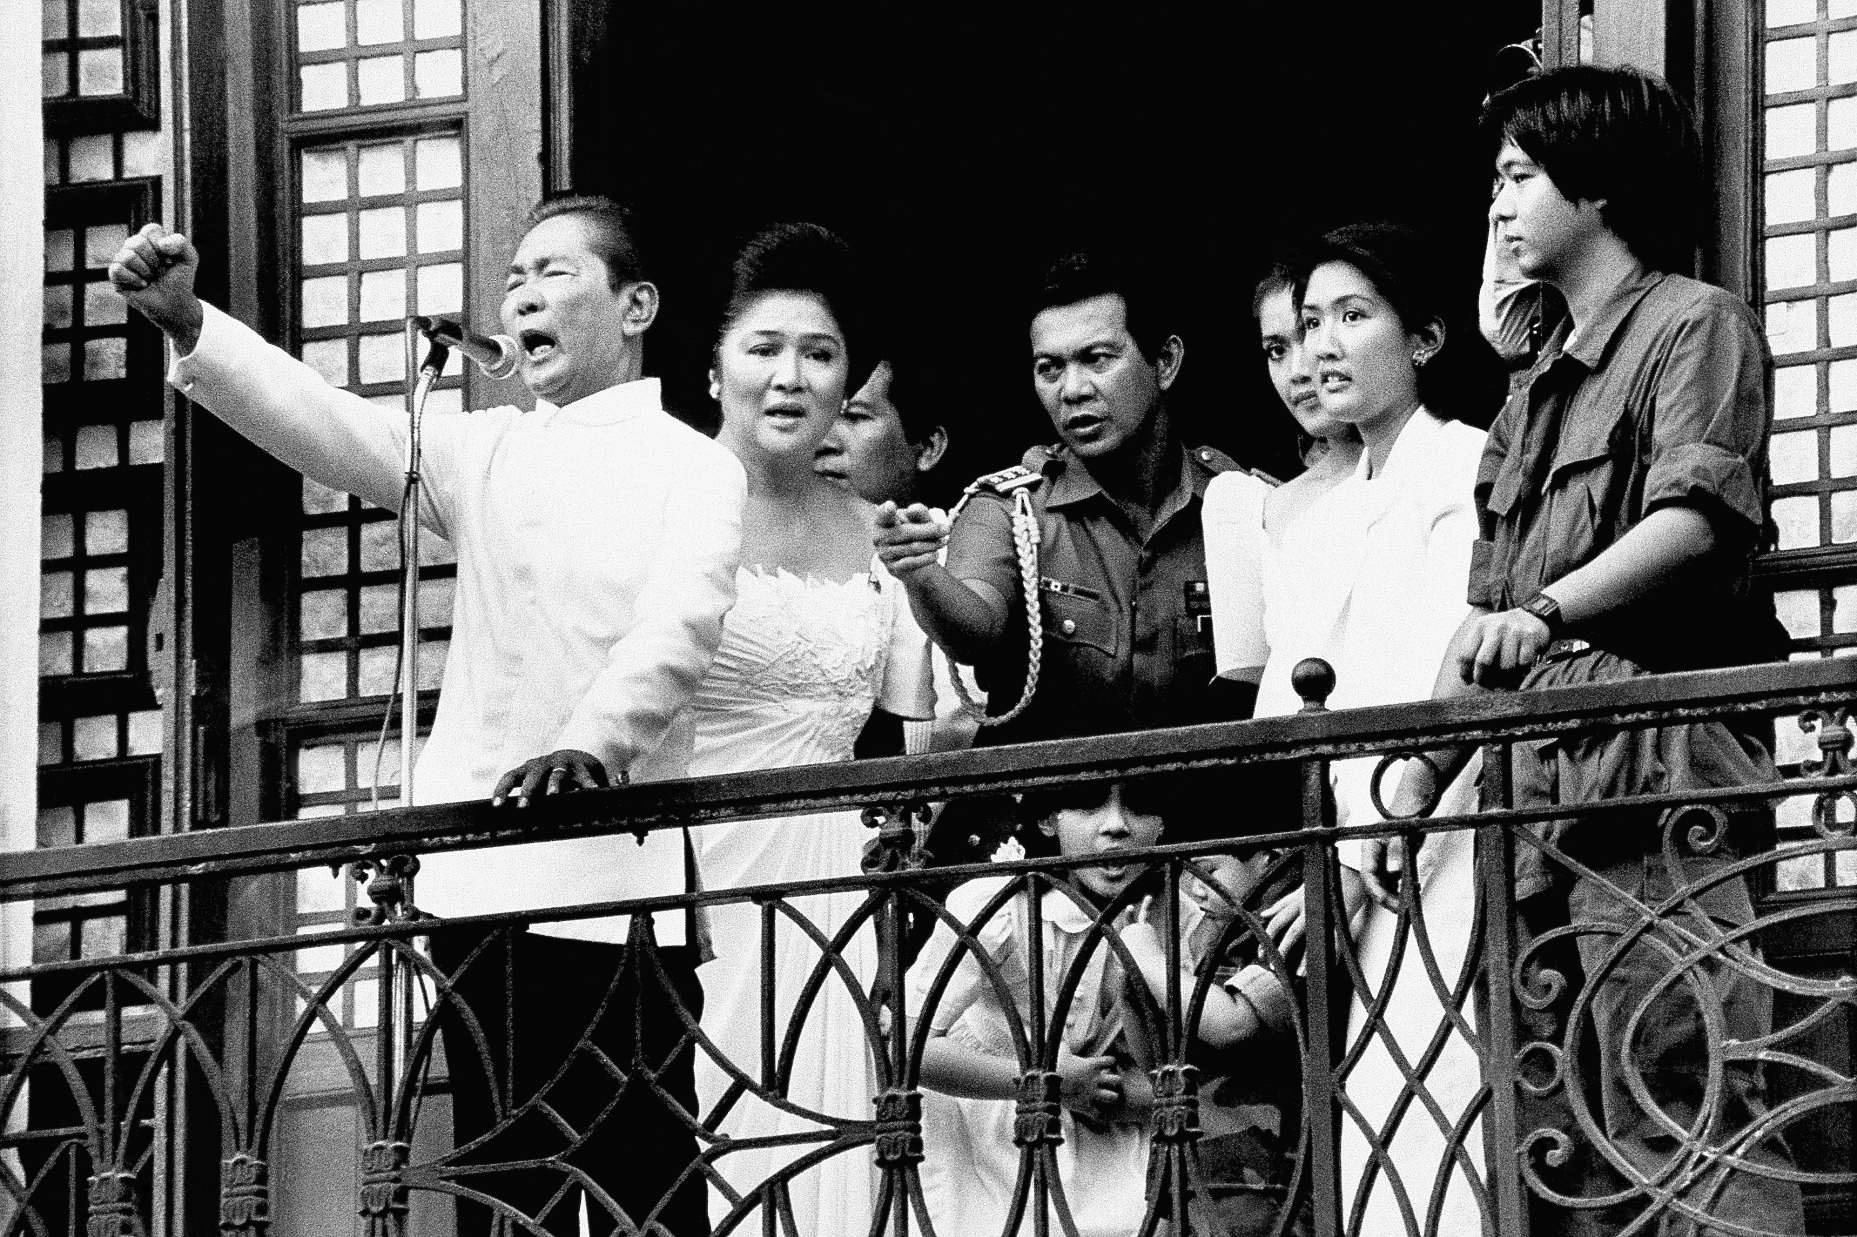 Ferdinand E. Marcos with his wife, Imelda at his side, gestures strongly from the balcony of Malacanang Palace on Tuesday, Feb. 25, 1986 in Manila, just after taking the oath of office as President of the Philippines. Just hours later, Marcos resigned and fled to the U.S. Air Force?s Clark Air Base, 50 miles northwest of Manila, as he prepared to accept an American offer to fly him out of the Philippines. (AP Photo/Alberto Marquez)